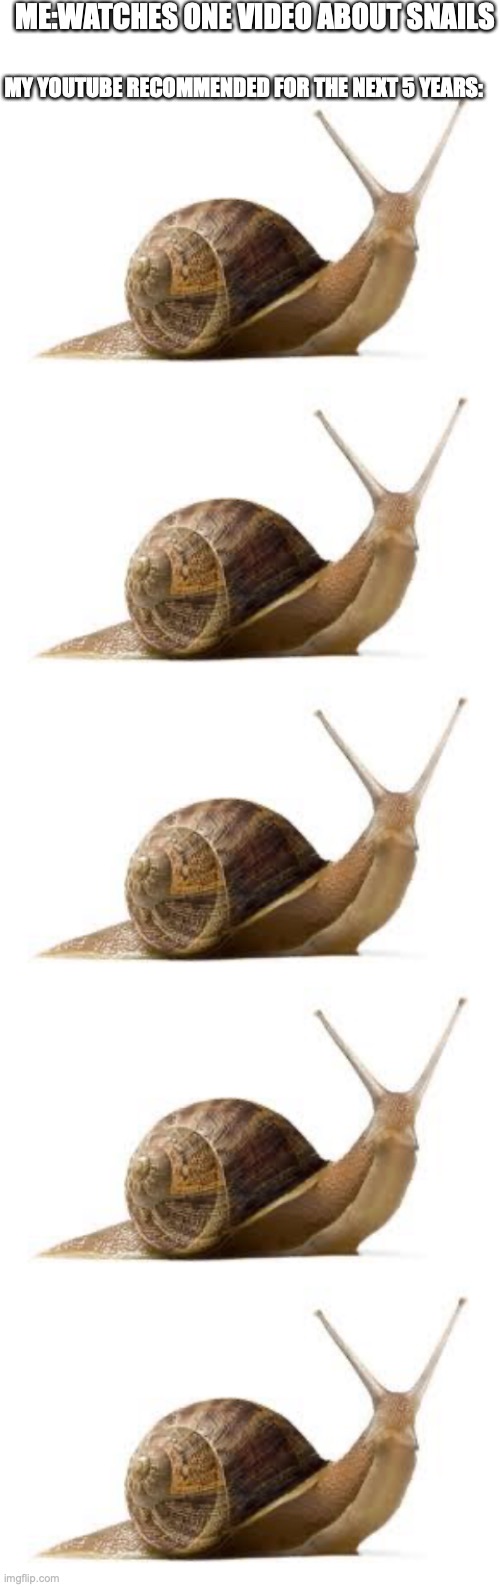 shitty meme | ME:WATCHES ONE VIDEO ABOUT SNAILS; MY YOUTUBE RECOMMENDED FOR THE NEXT 5 YEARS: | image tagged in blank white template,snail | made w/ Imgflip meme maker